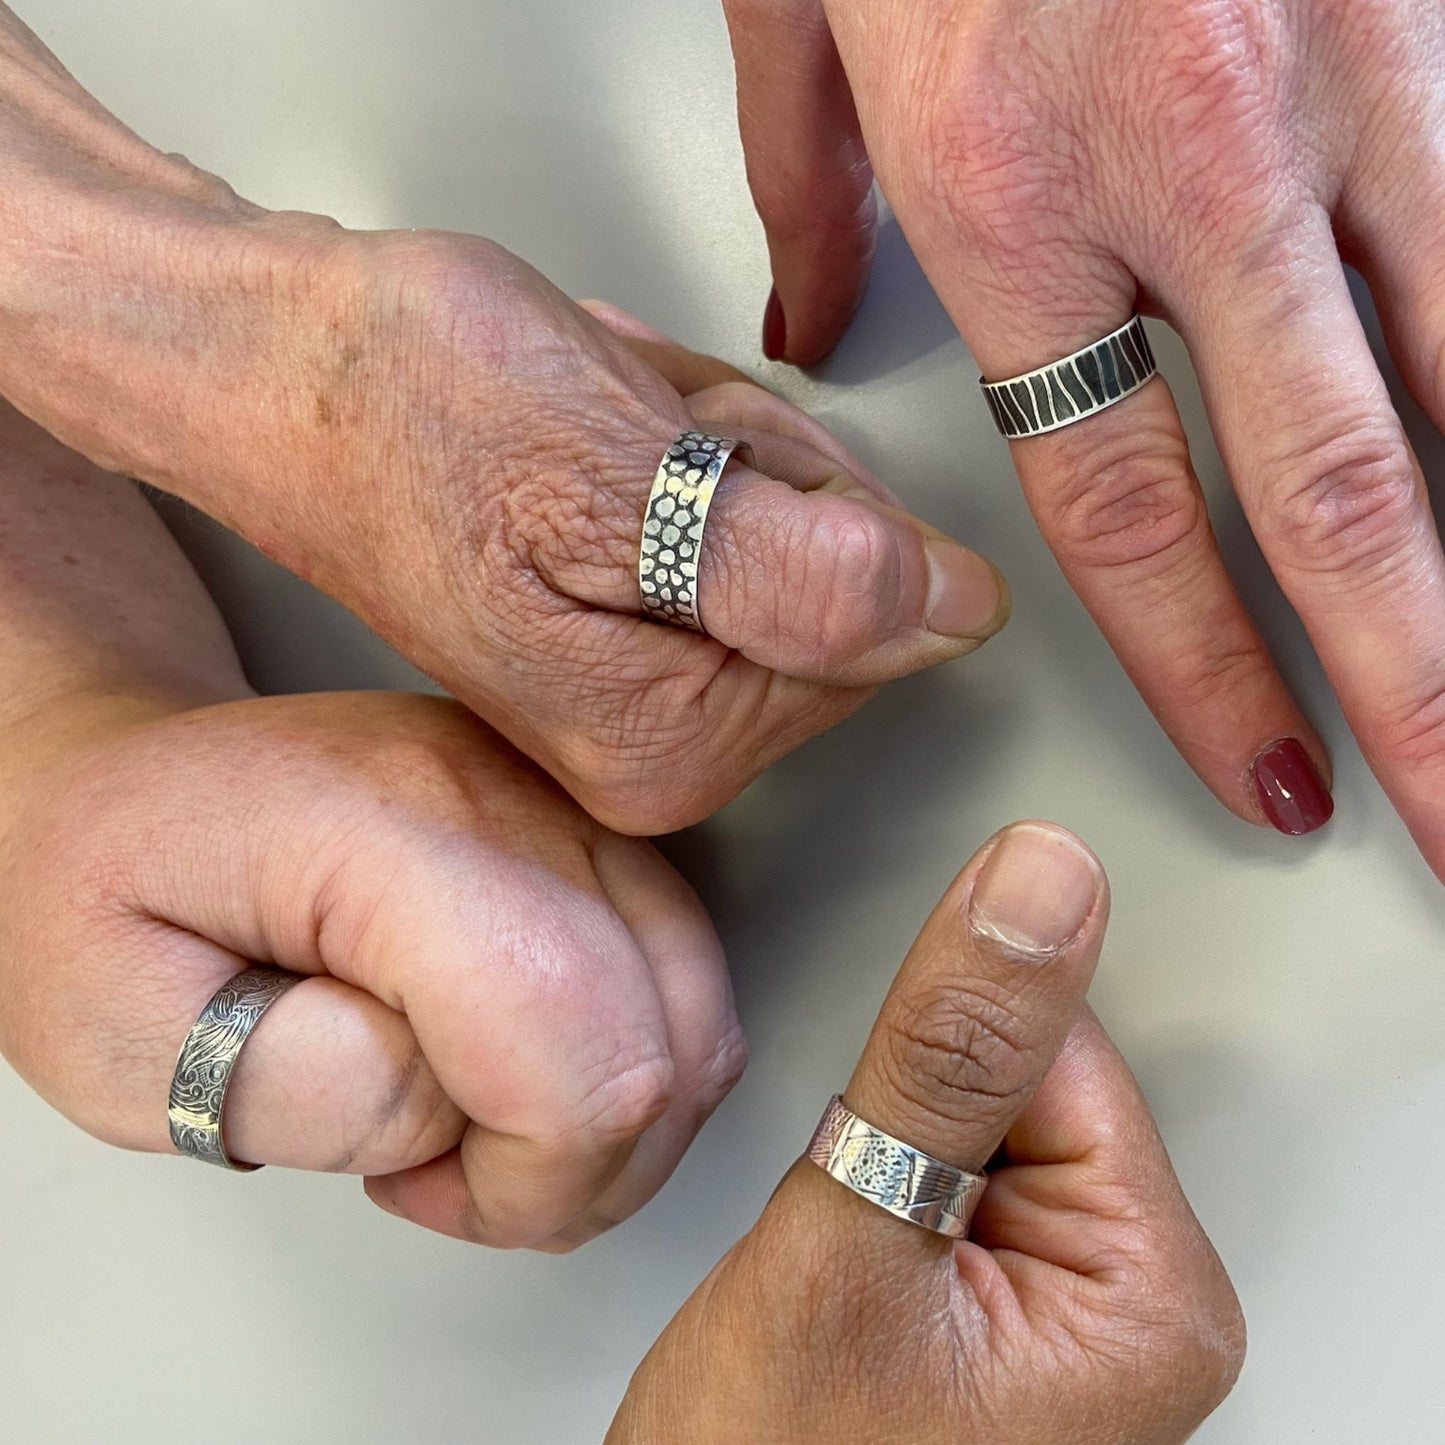 Students wearing the silver rings they made